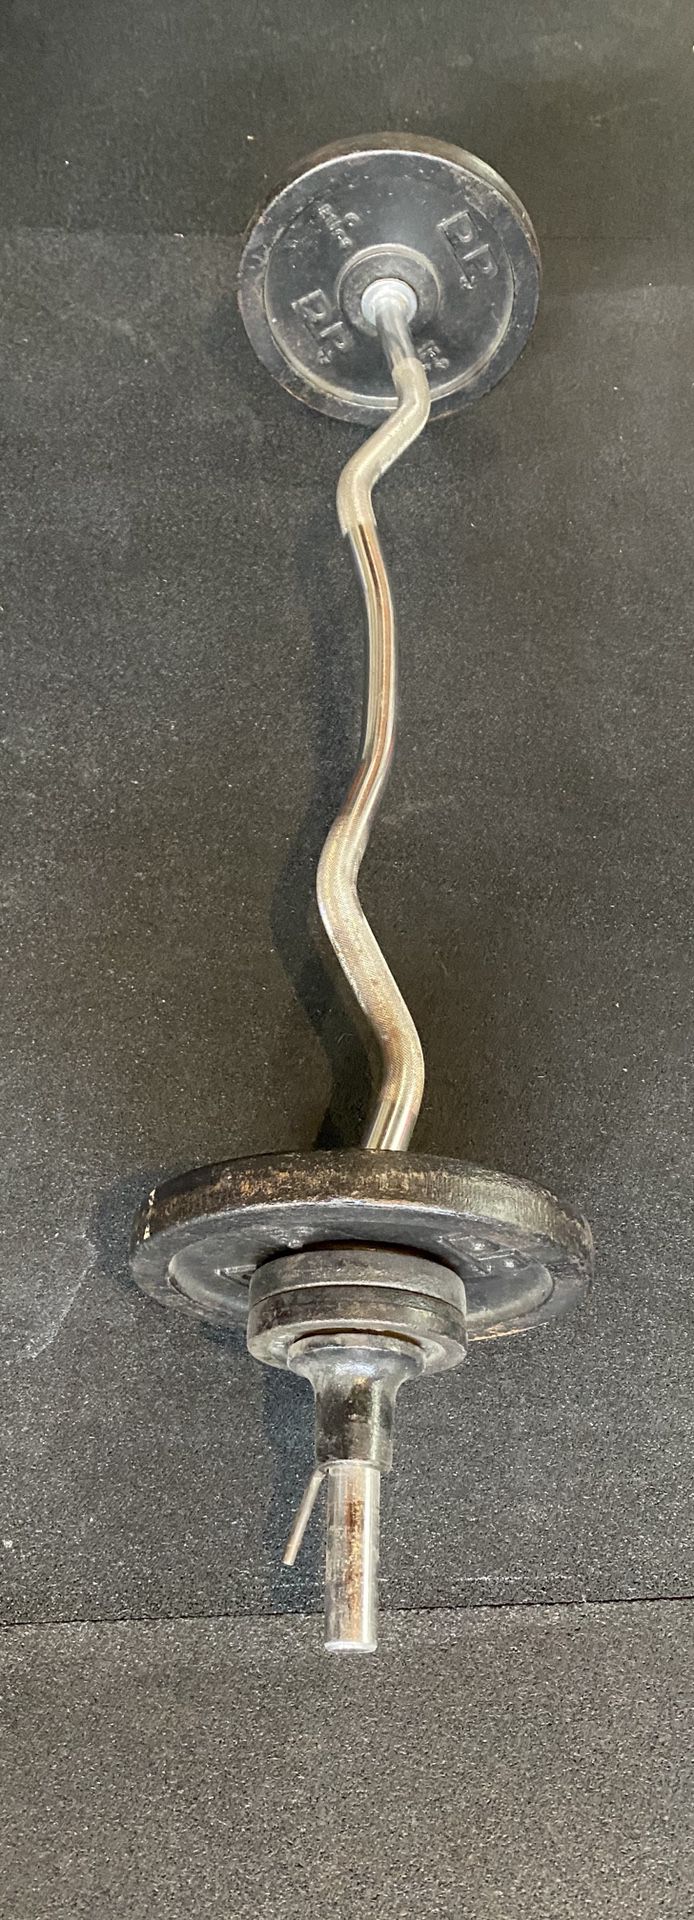 Standard Curl Bar with Weights